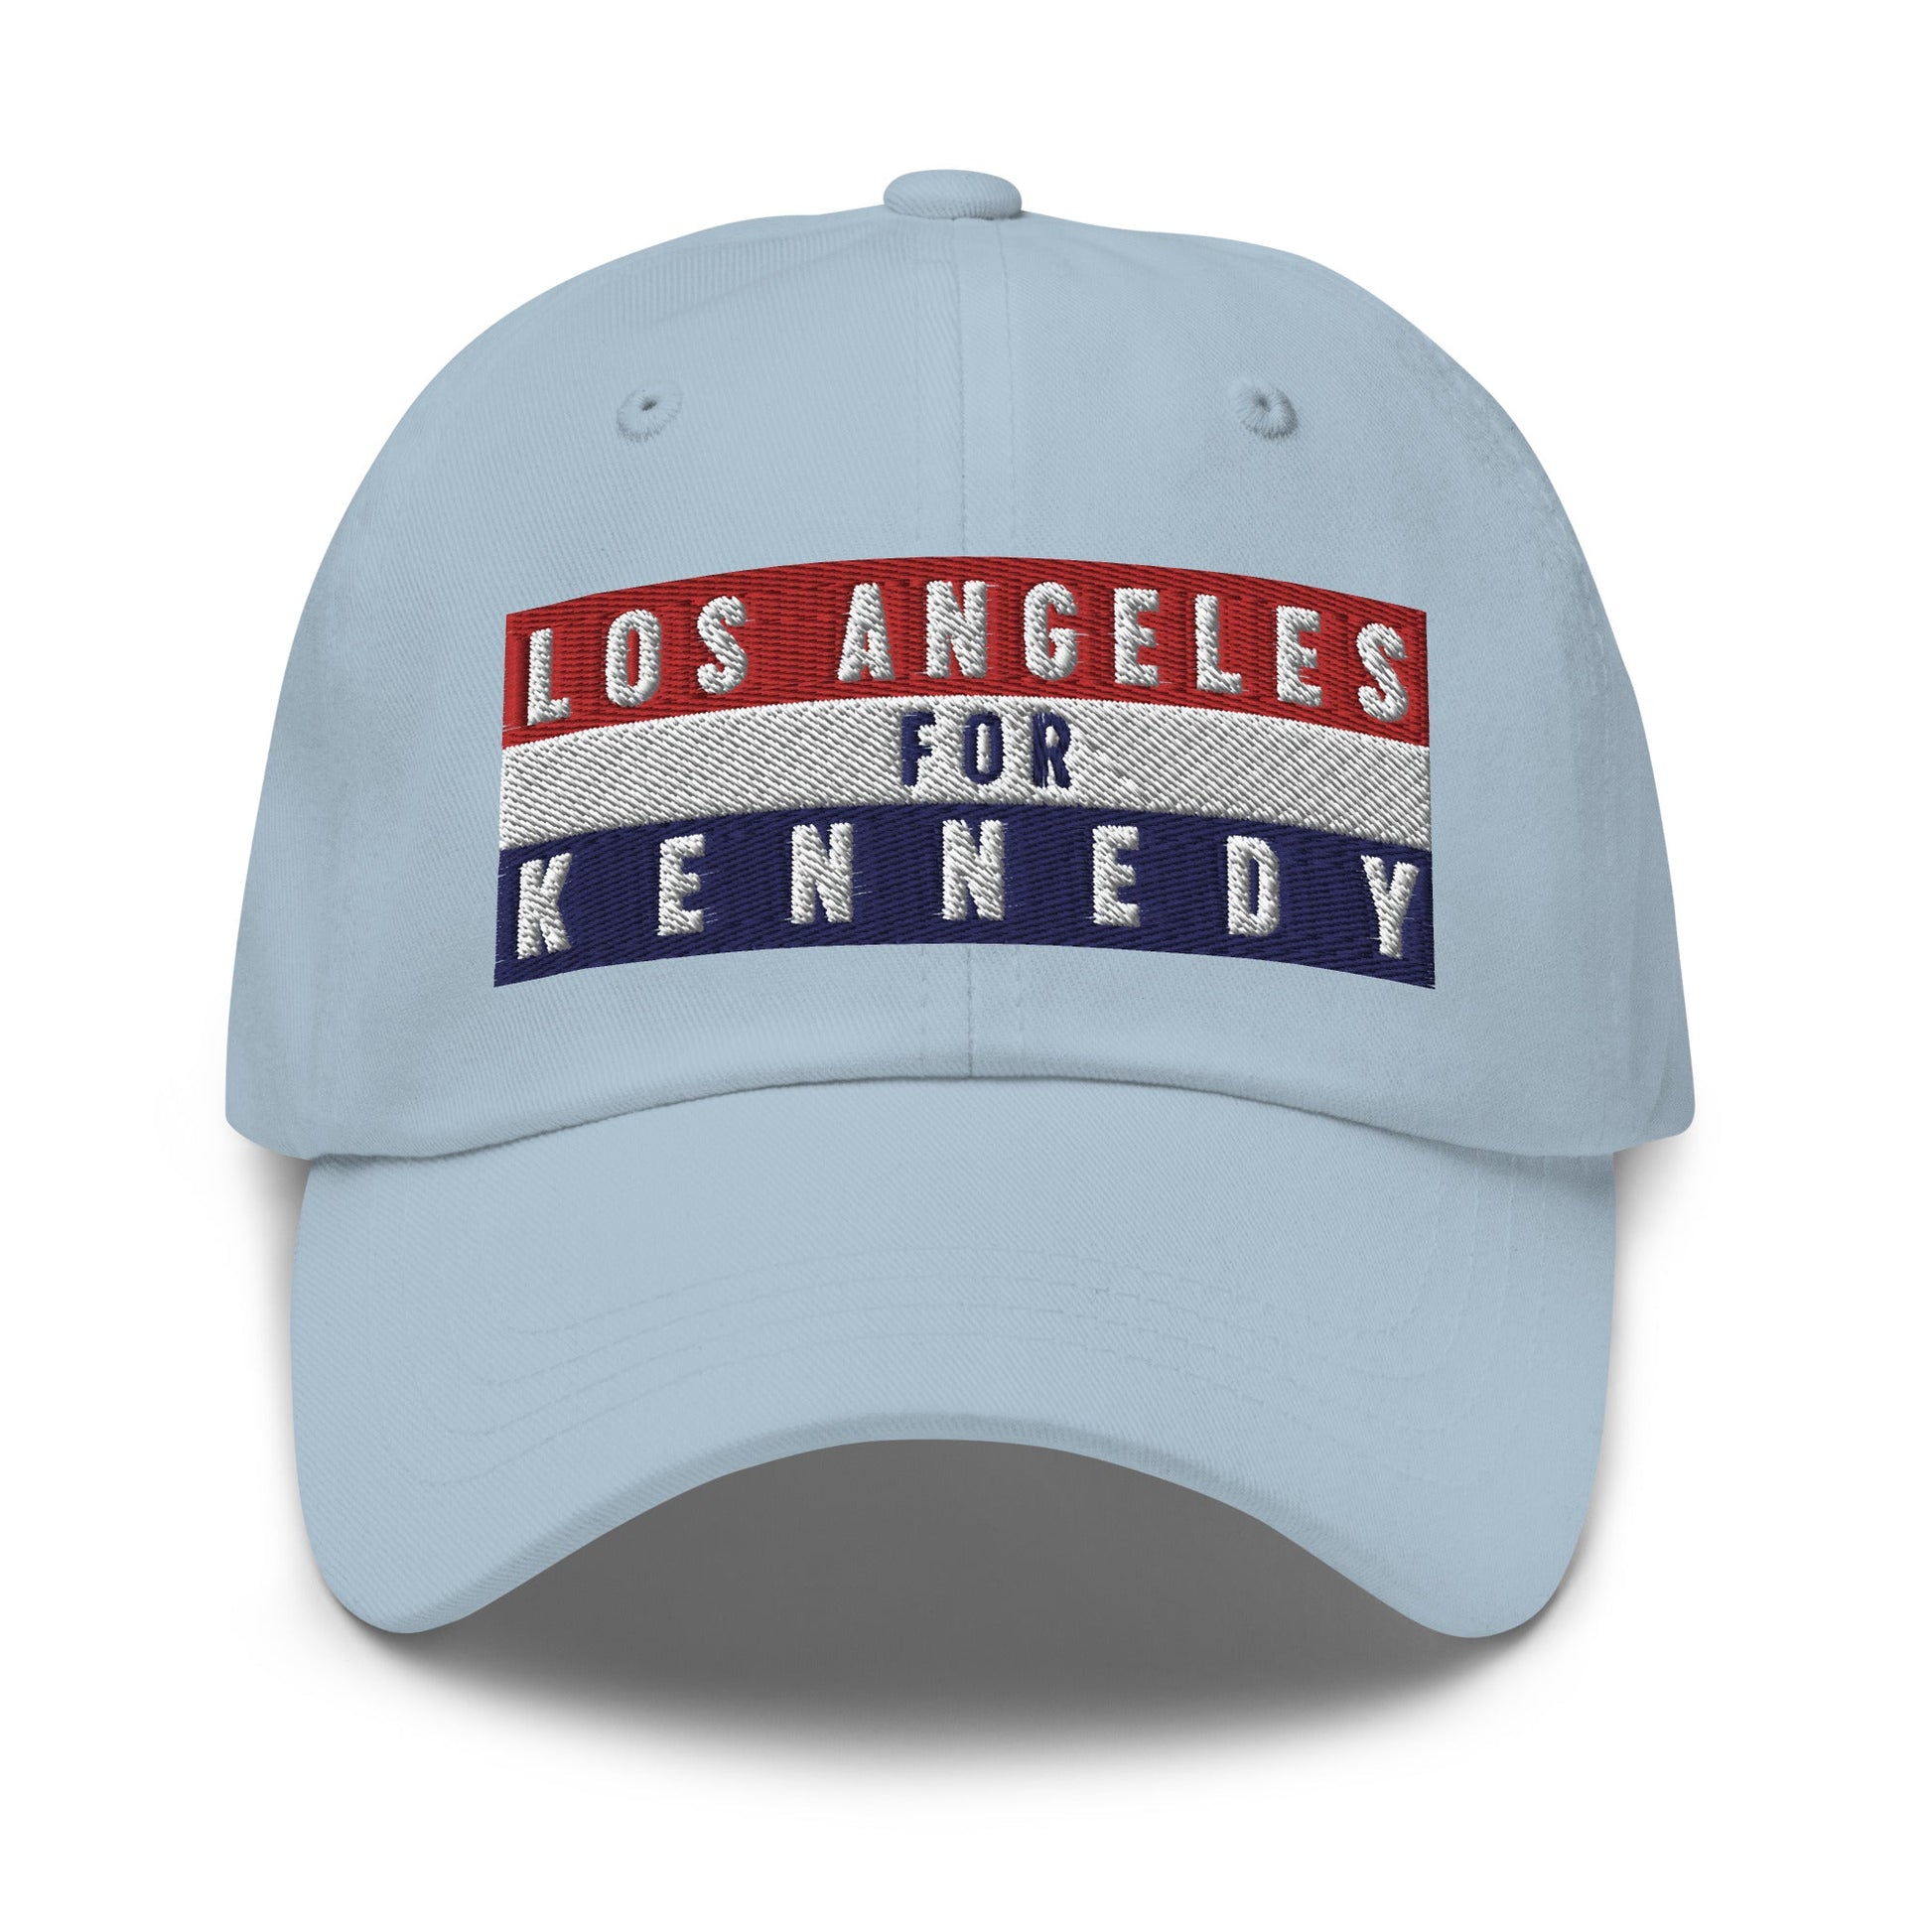 Los Angeles for Kennedy Dad Hat - TEAM KENNEDY. All rights reserved